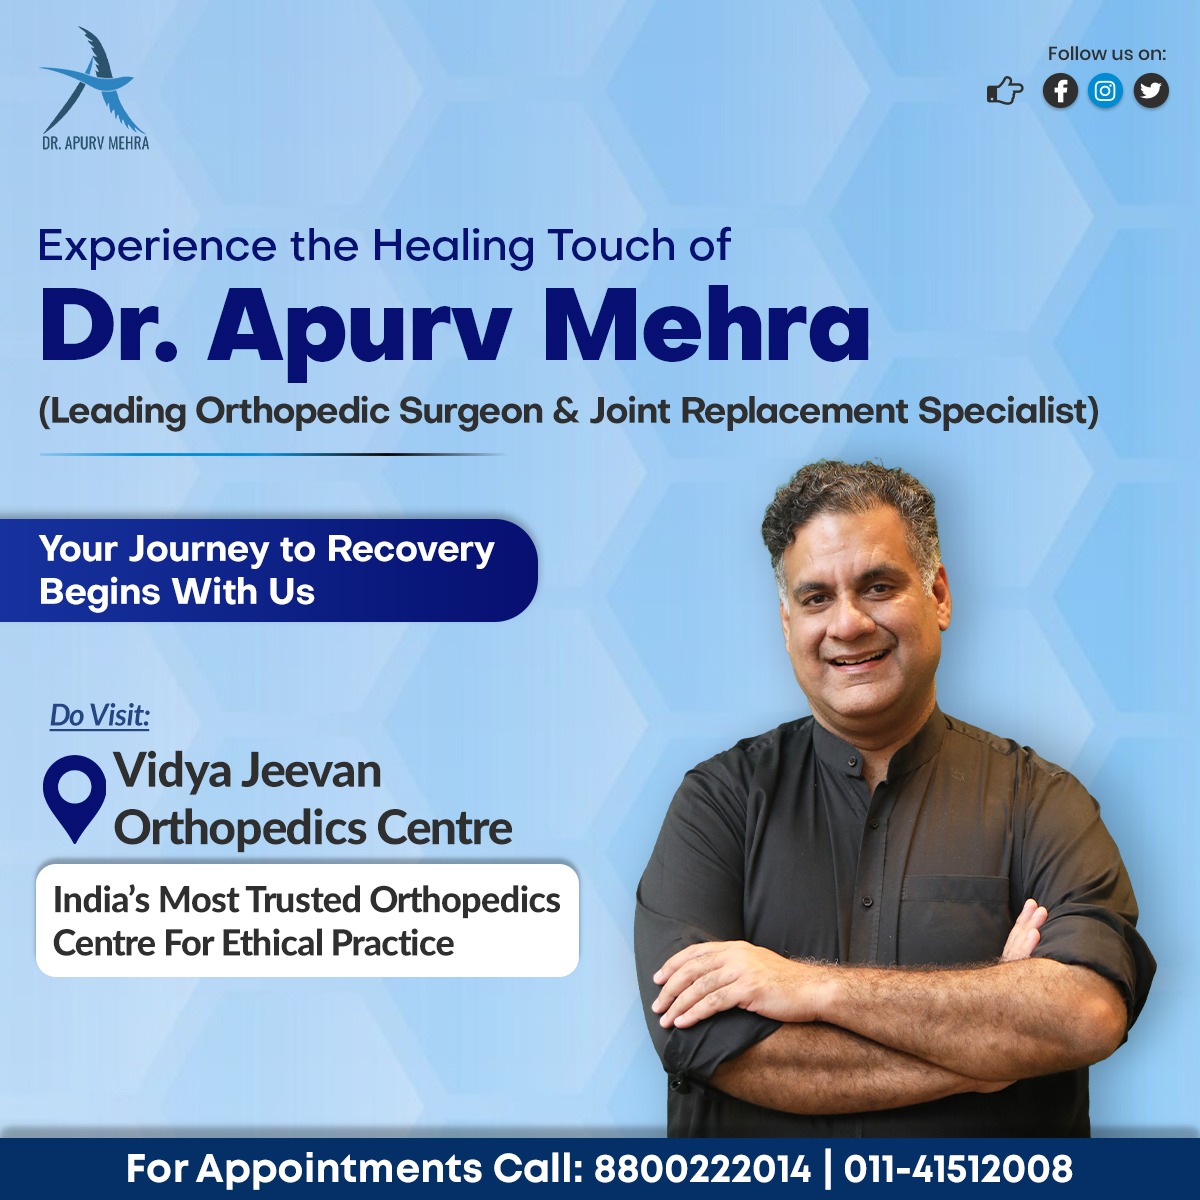 Experience authentic and compassionate pain relief at the Vidya Jeevan Orthopedics Center in East Delhi.
.
Please call 8800222014 or 011-41512008 for appointments.
.
For More Such Information Stay Connected at @apurv.mehra
.
#DrApurvMehra #Xray #Fracture #bone #operation #Surgery